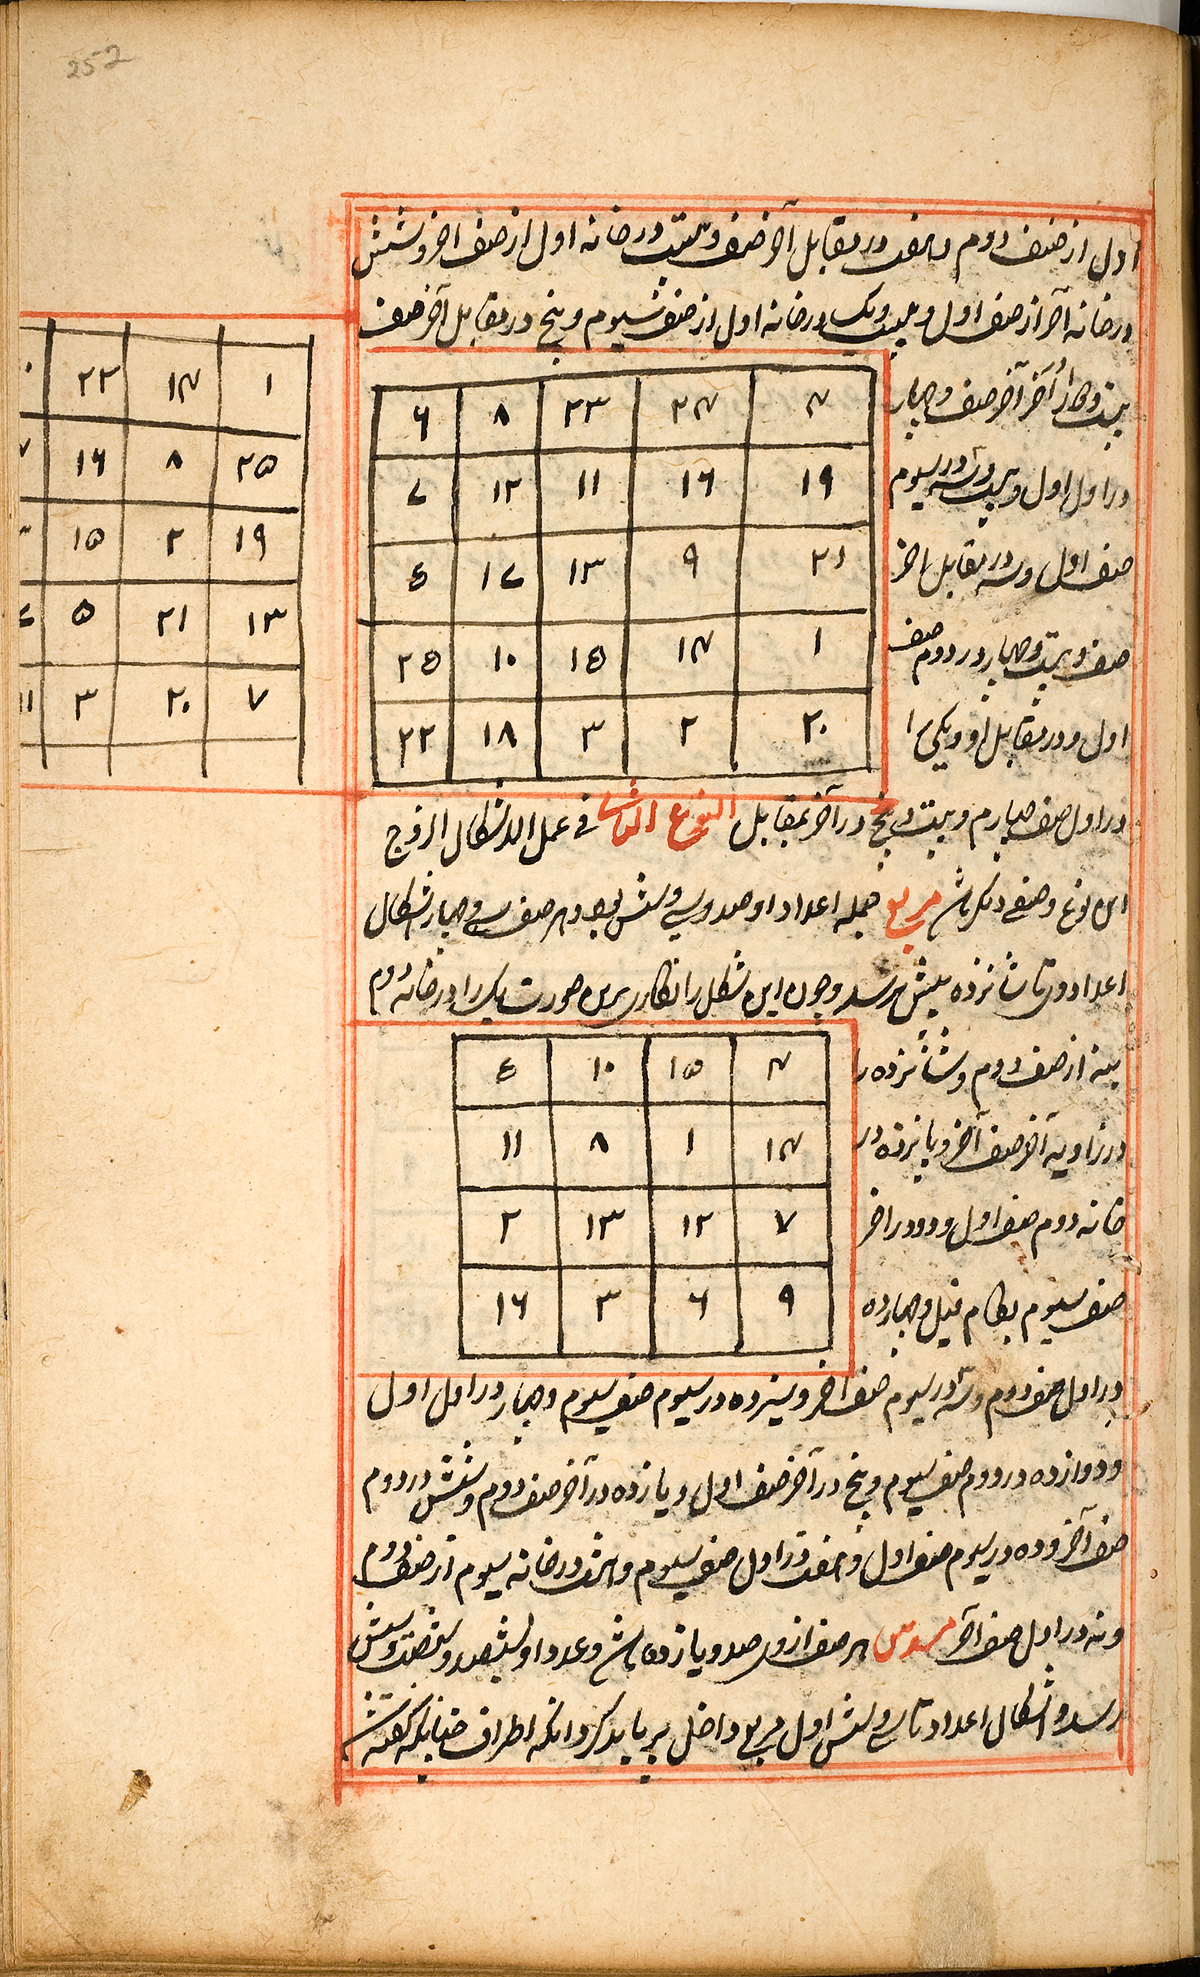 Three mathematical charts showing methods of calculating the calendar; the first chart has five rows and five columns of boxes with Arabic numbers arranged in them; the second chart has four rows and four columns, also with numbers; the third chart is placed to the left outside the regular margins of the text block with five rows and four columns, also with numbers; surrounded by Persian text and a red double ruled border.